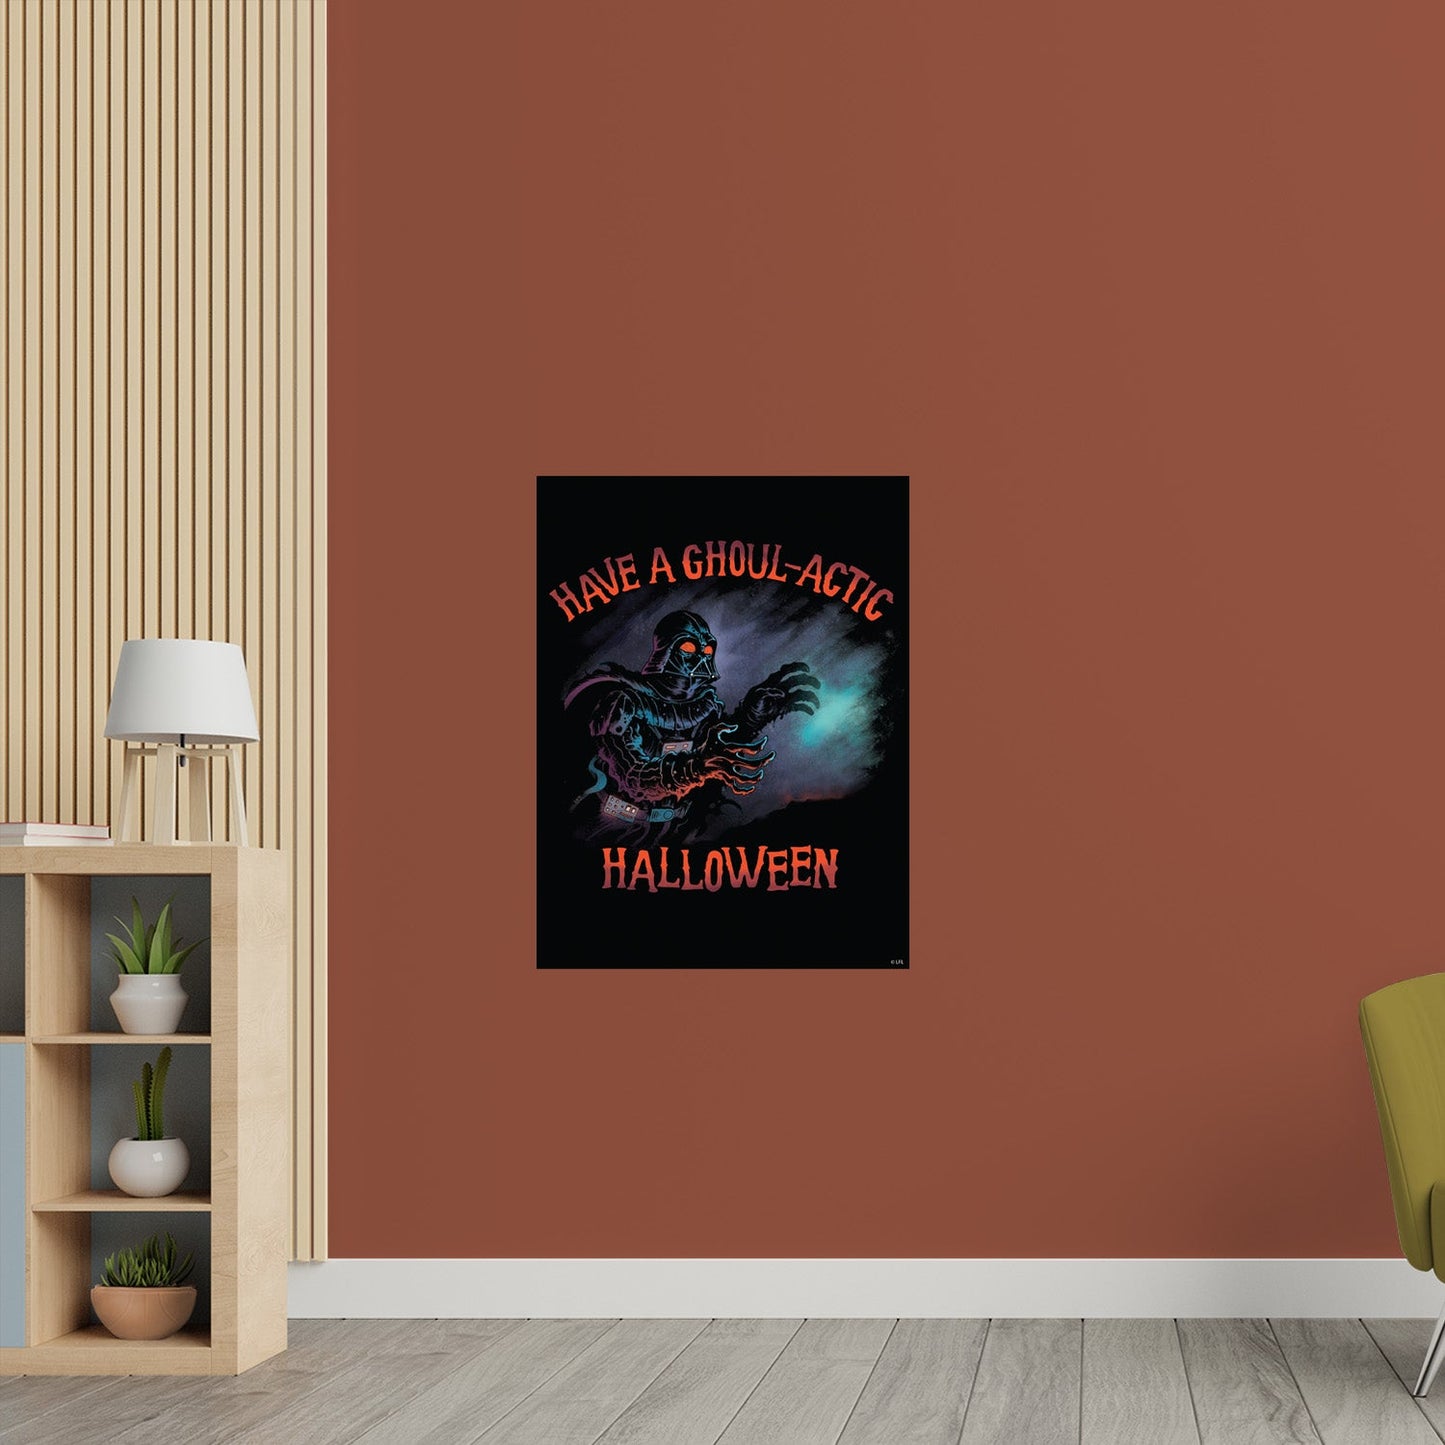 Darth Vader Have a Ghoul-actic Halloween Poster - Officially Licensed Star Wars Removable Adhesive Decal